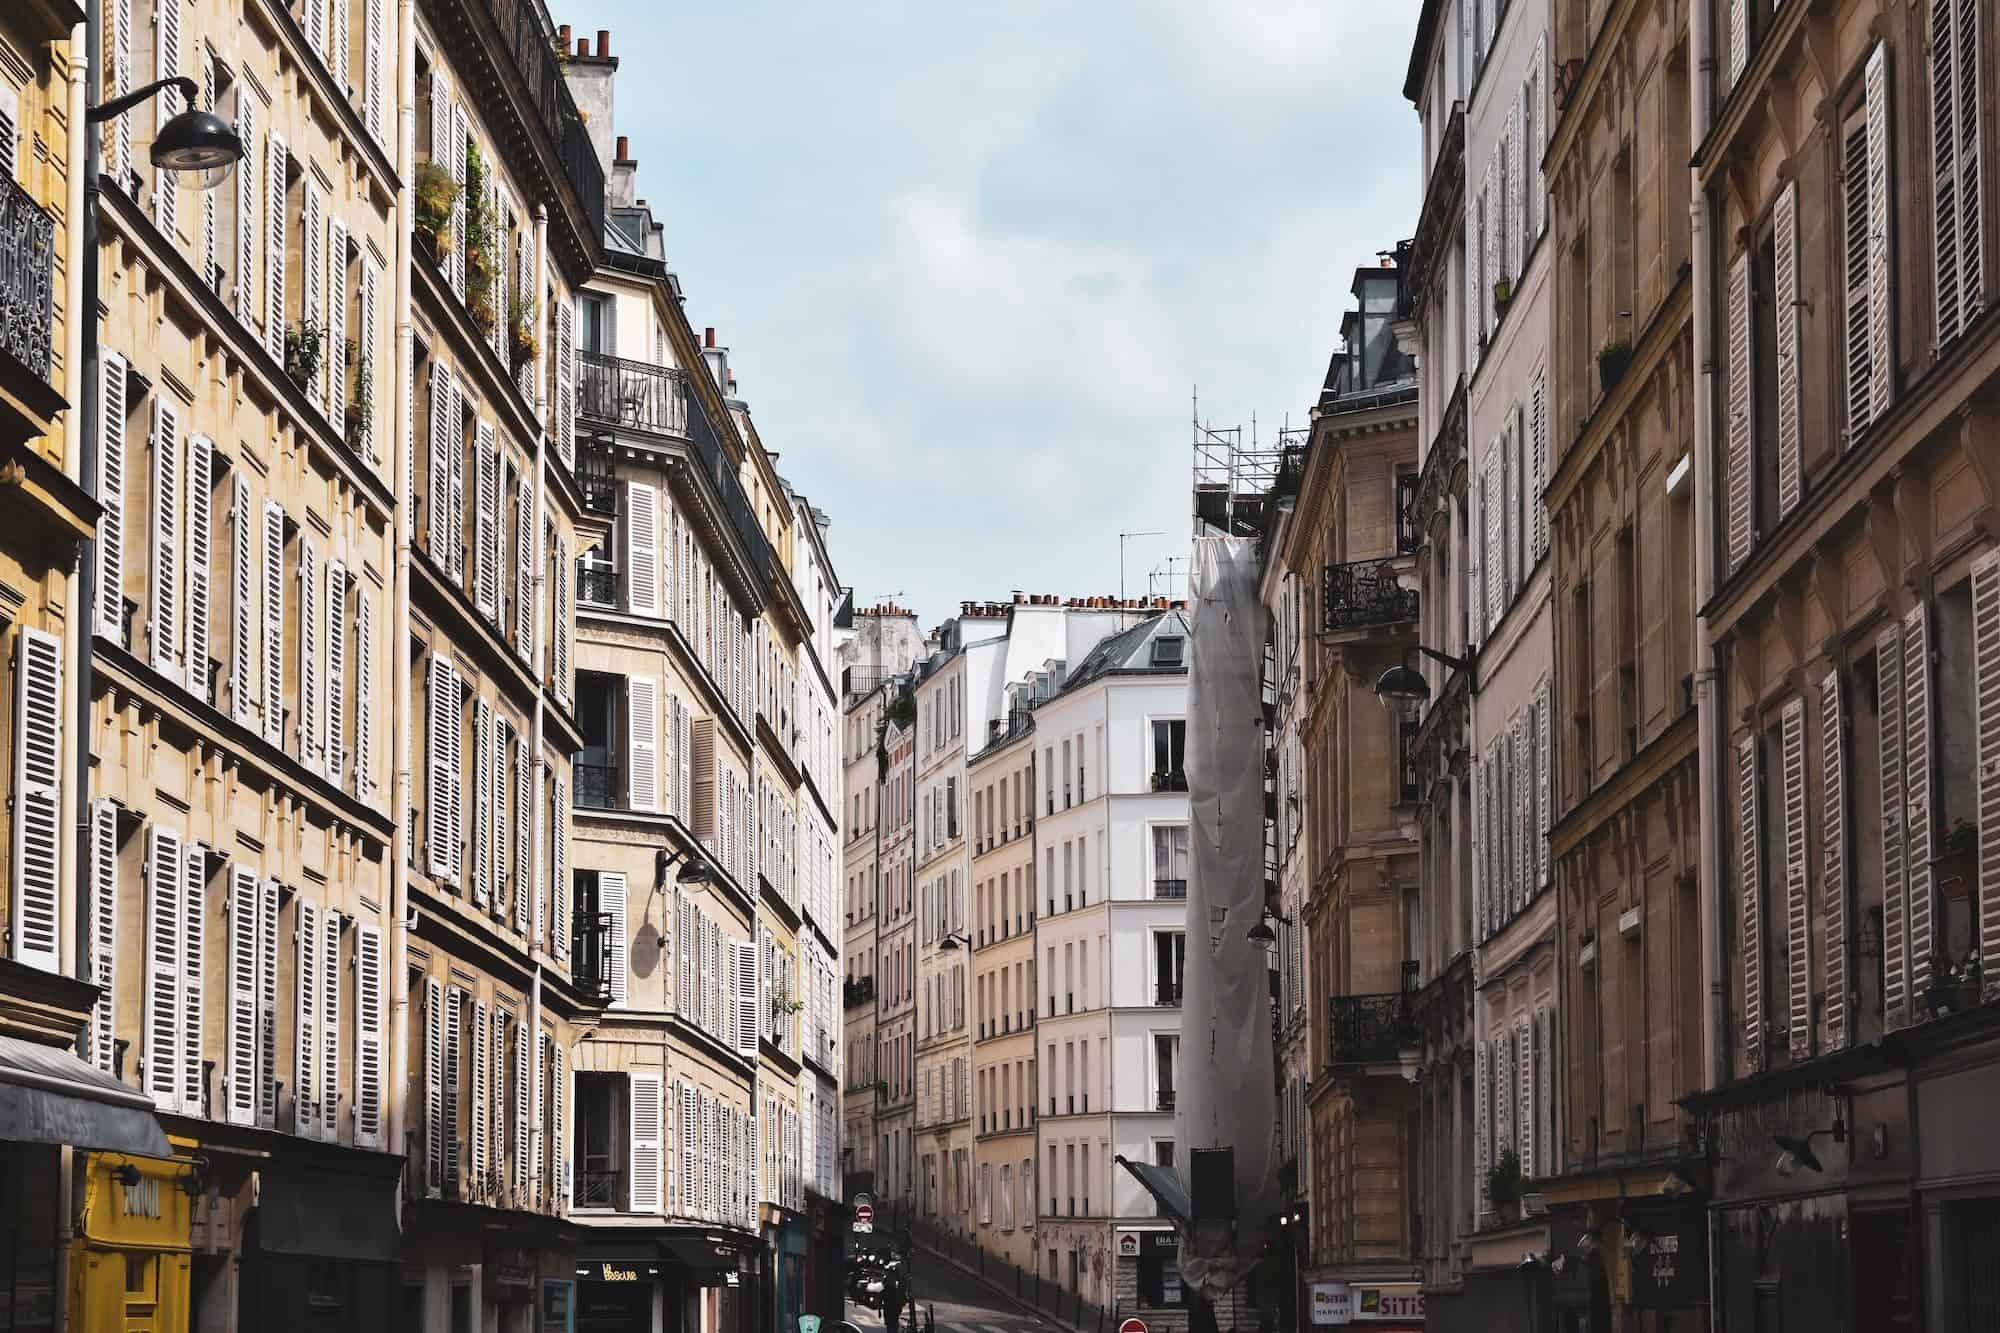 A view of white stone buildings with shutters lined up on both sides of a Paris street.